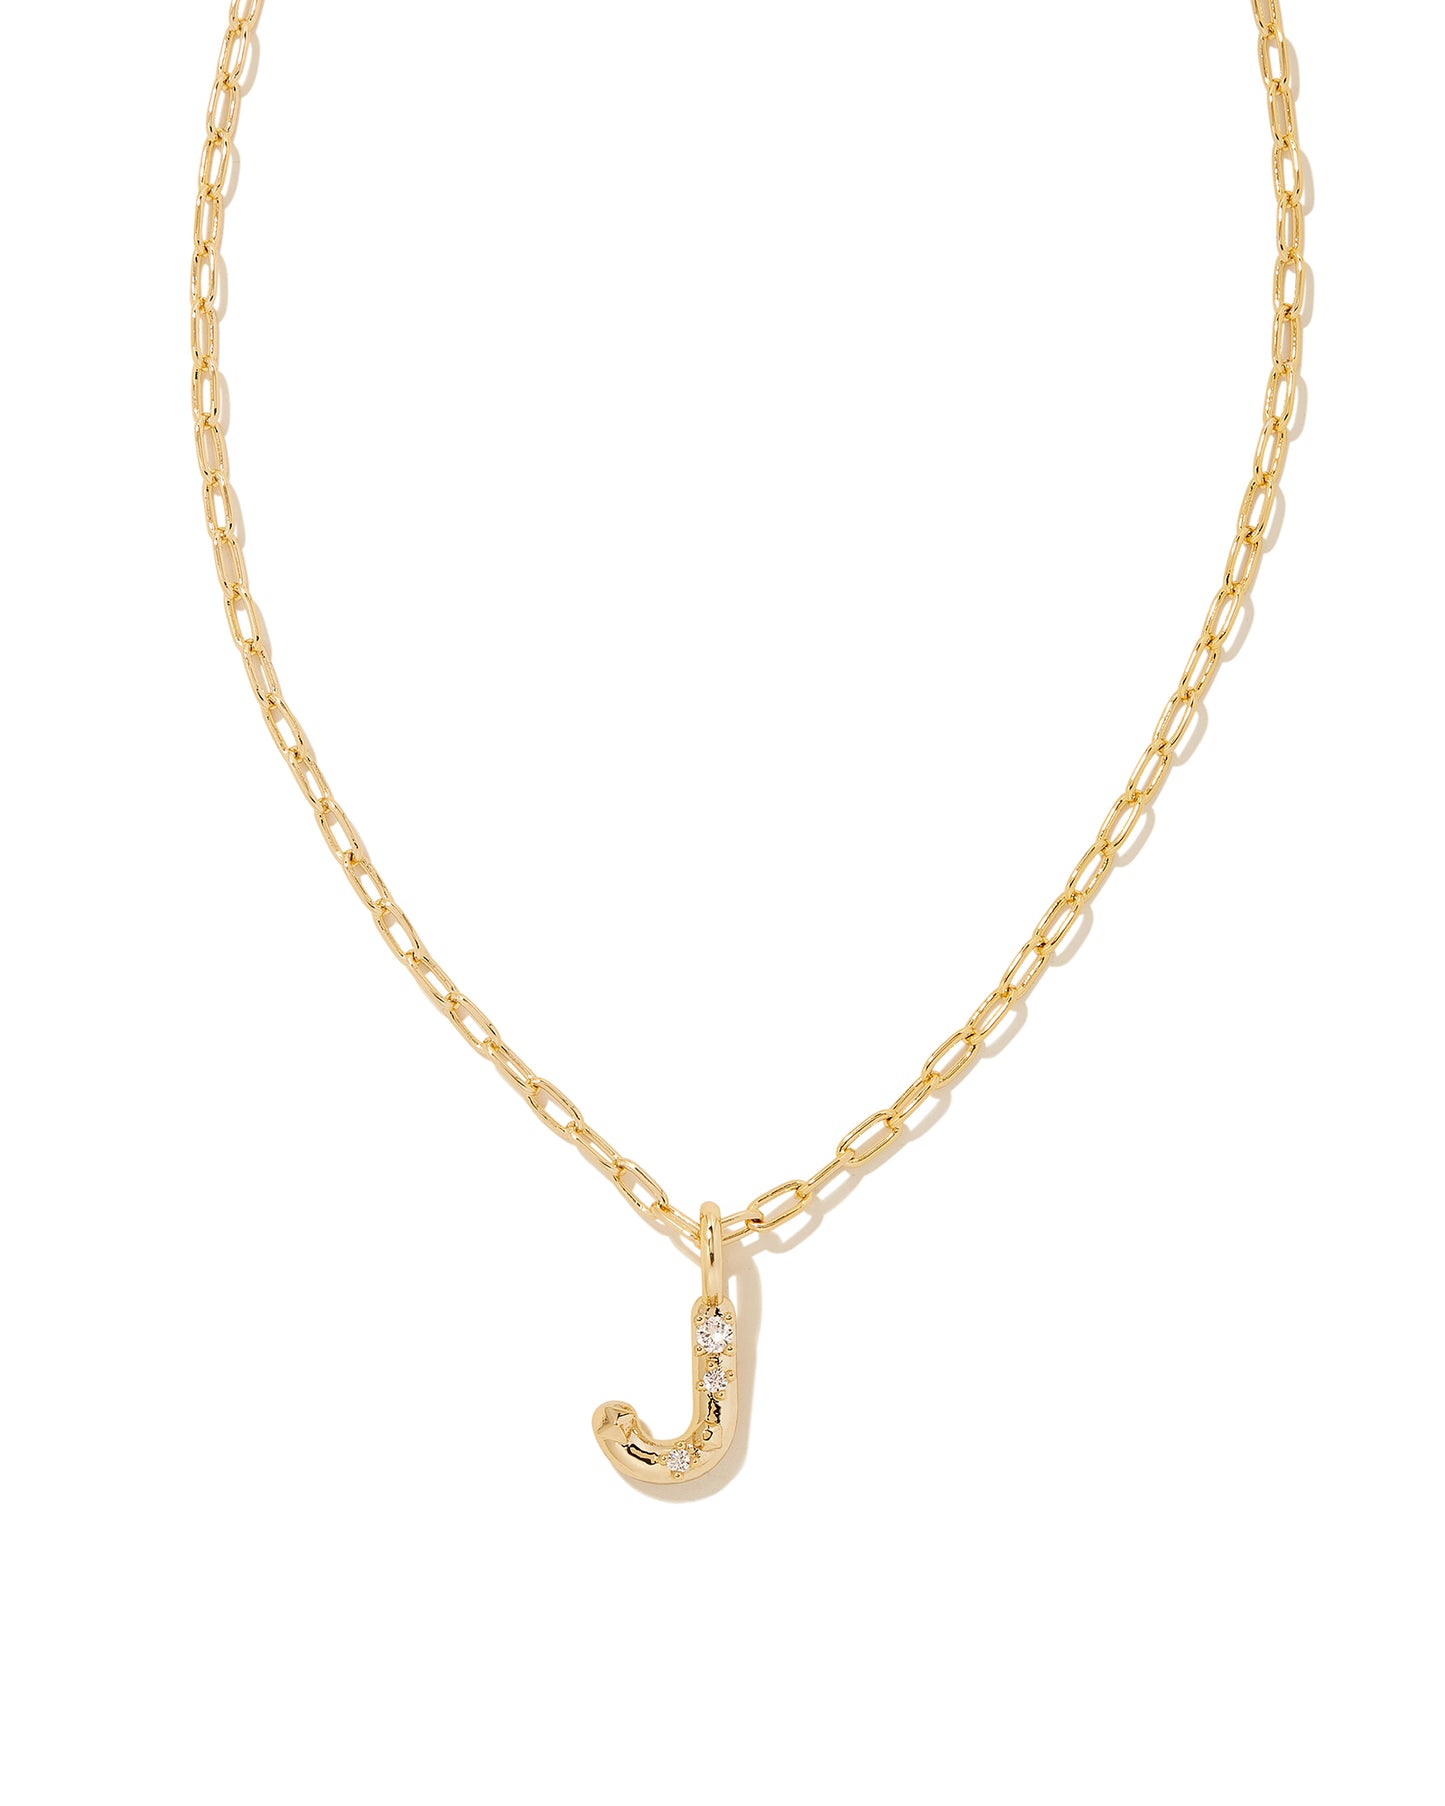 Kendra Scott: Crystal Letter Pendant Necklace in Gold